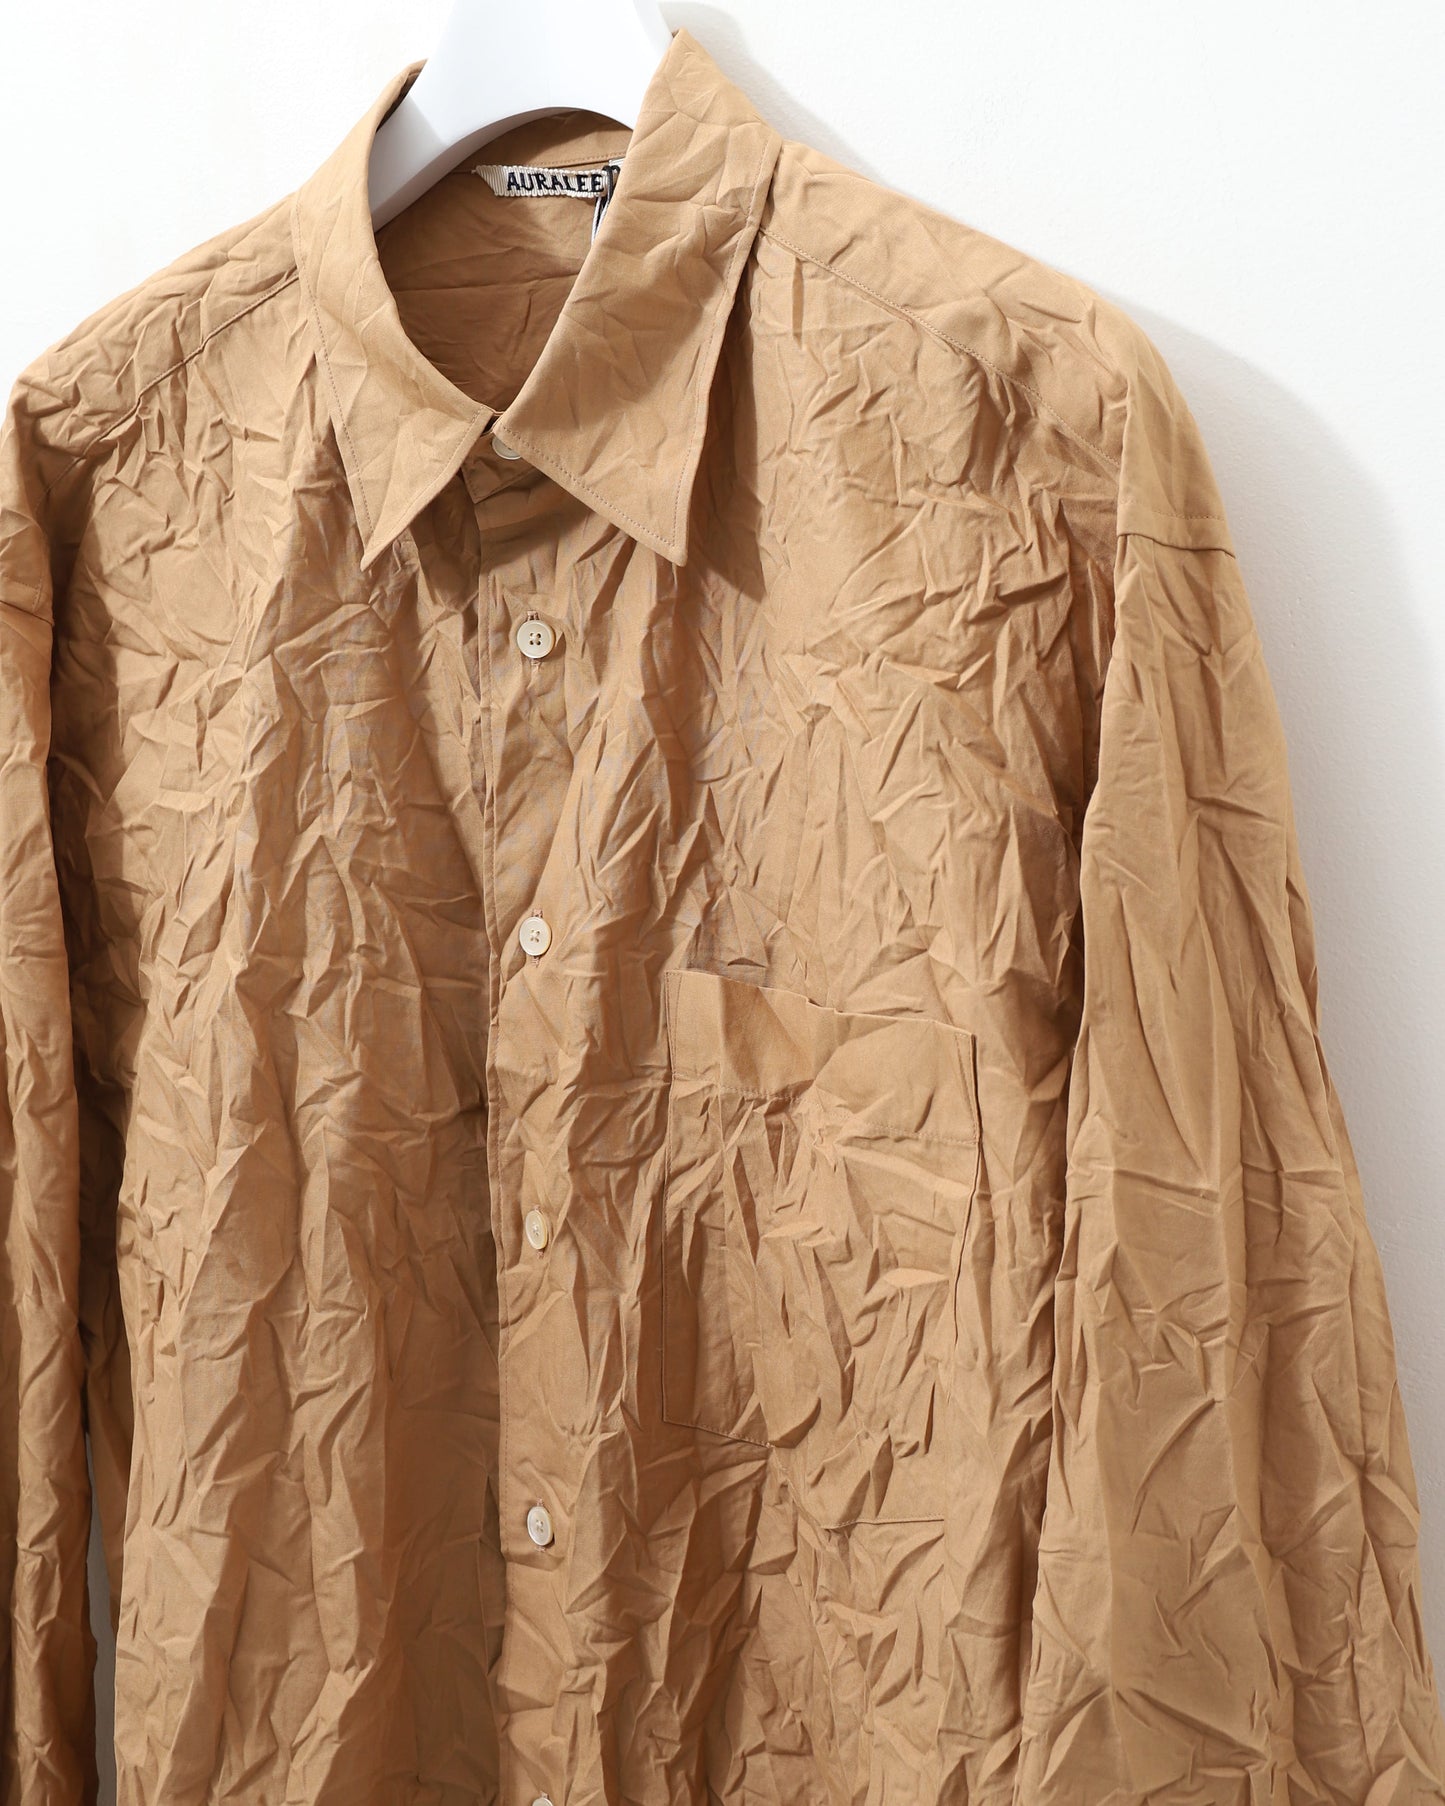 WRINKLED WASHED FINX TWILL SHIRT BROWN